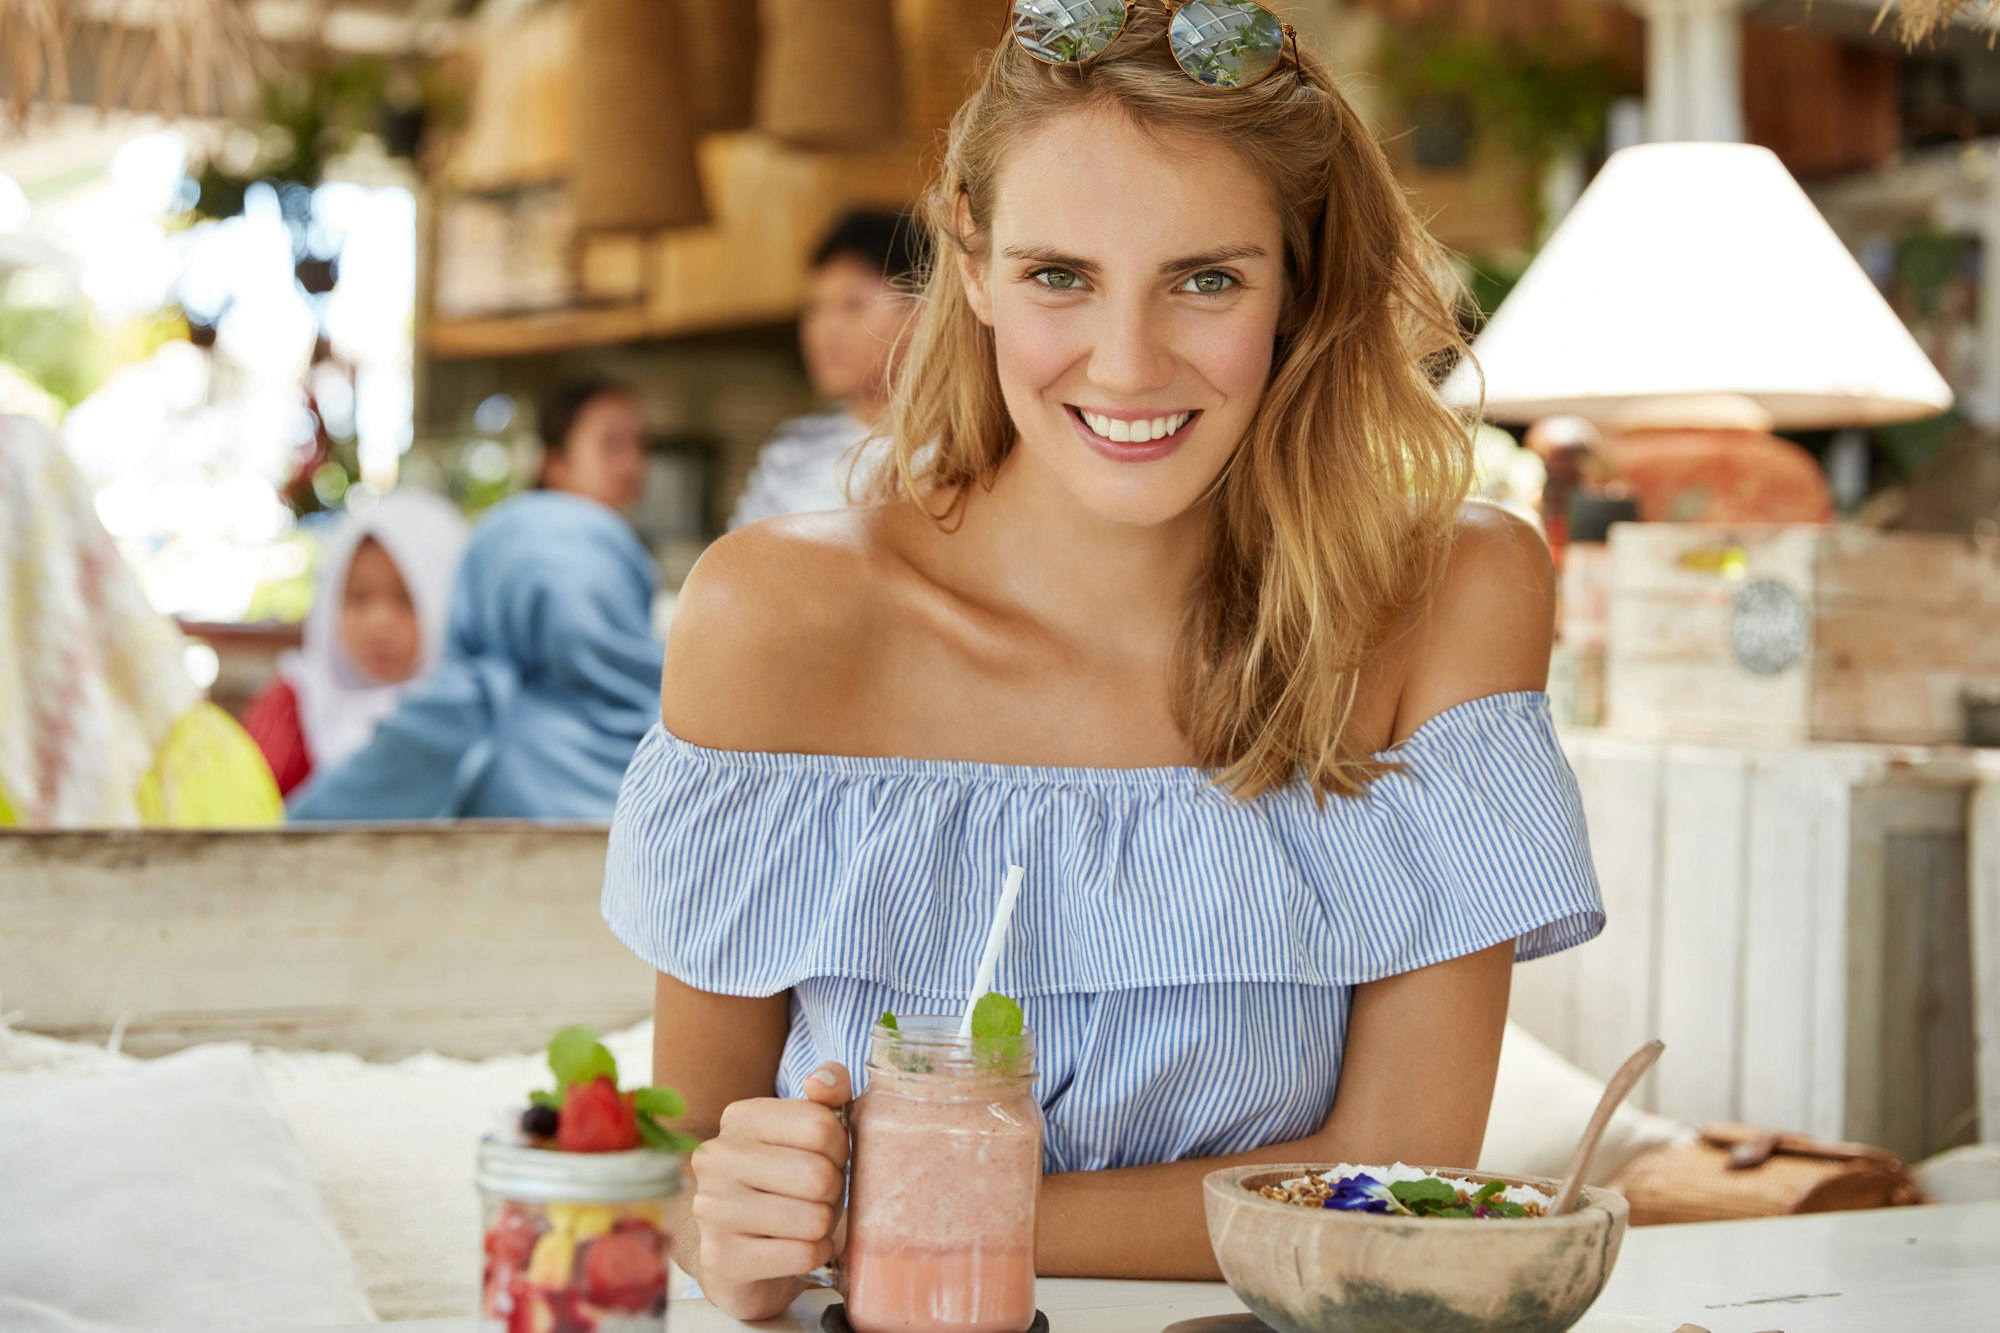 Pretty young woman in sylish blouse, drinks shake, eats salad, sits at cafeteria, smiles happily, sp